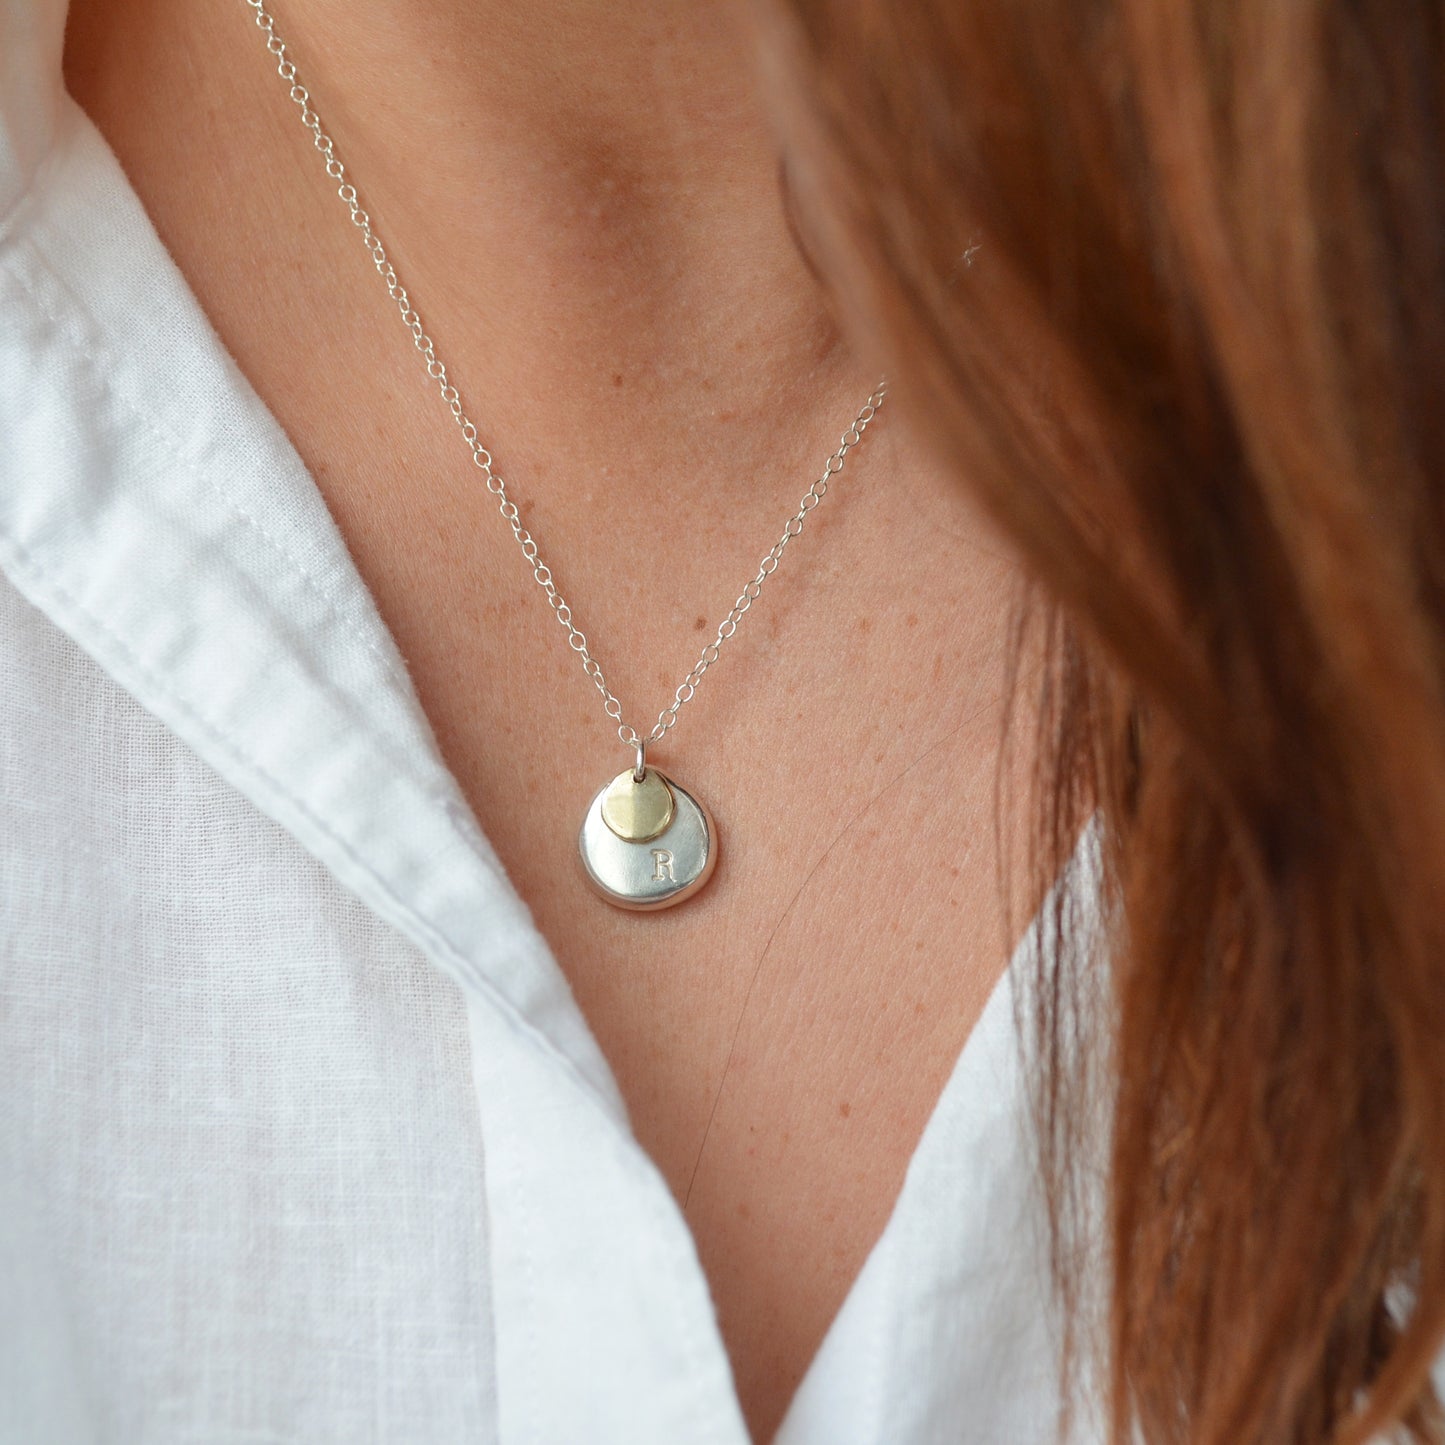 The Shilling Necklace - recycled sterling silver and 9ct gold personalised necklace - hand stamped mixed metal monogram pendant